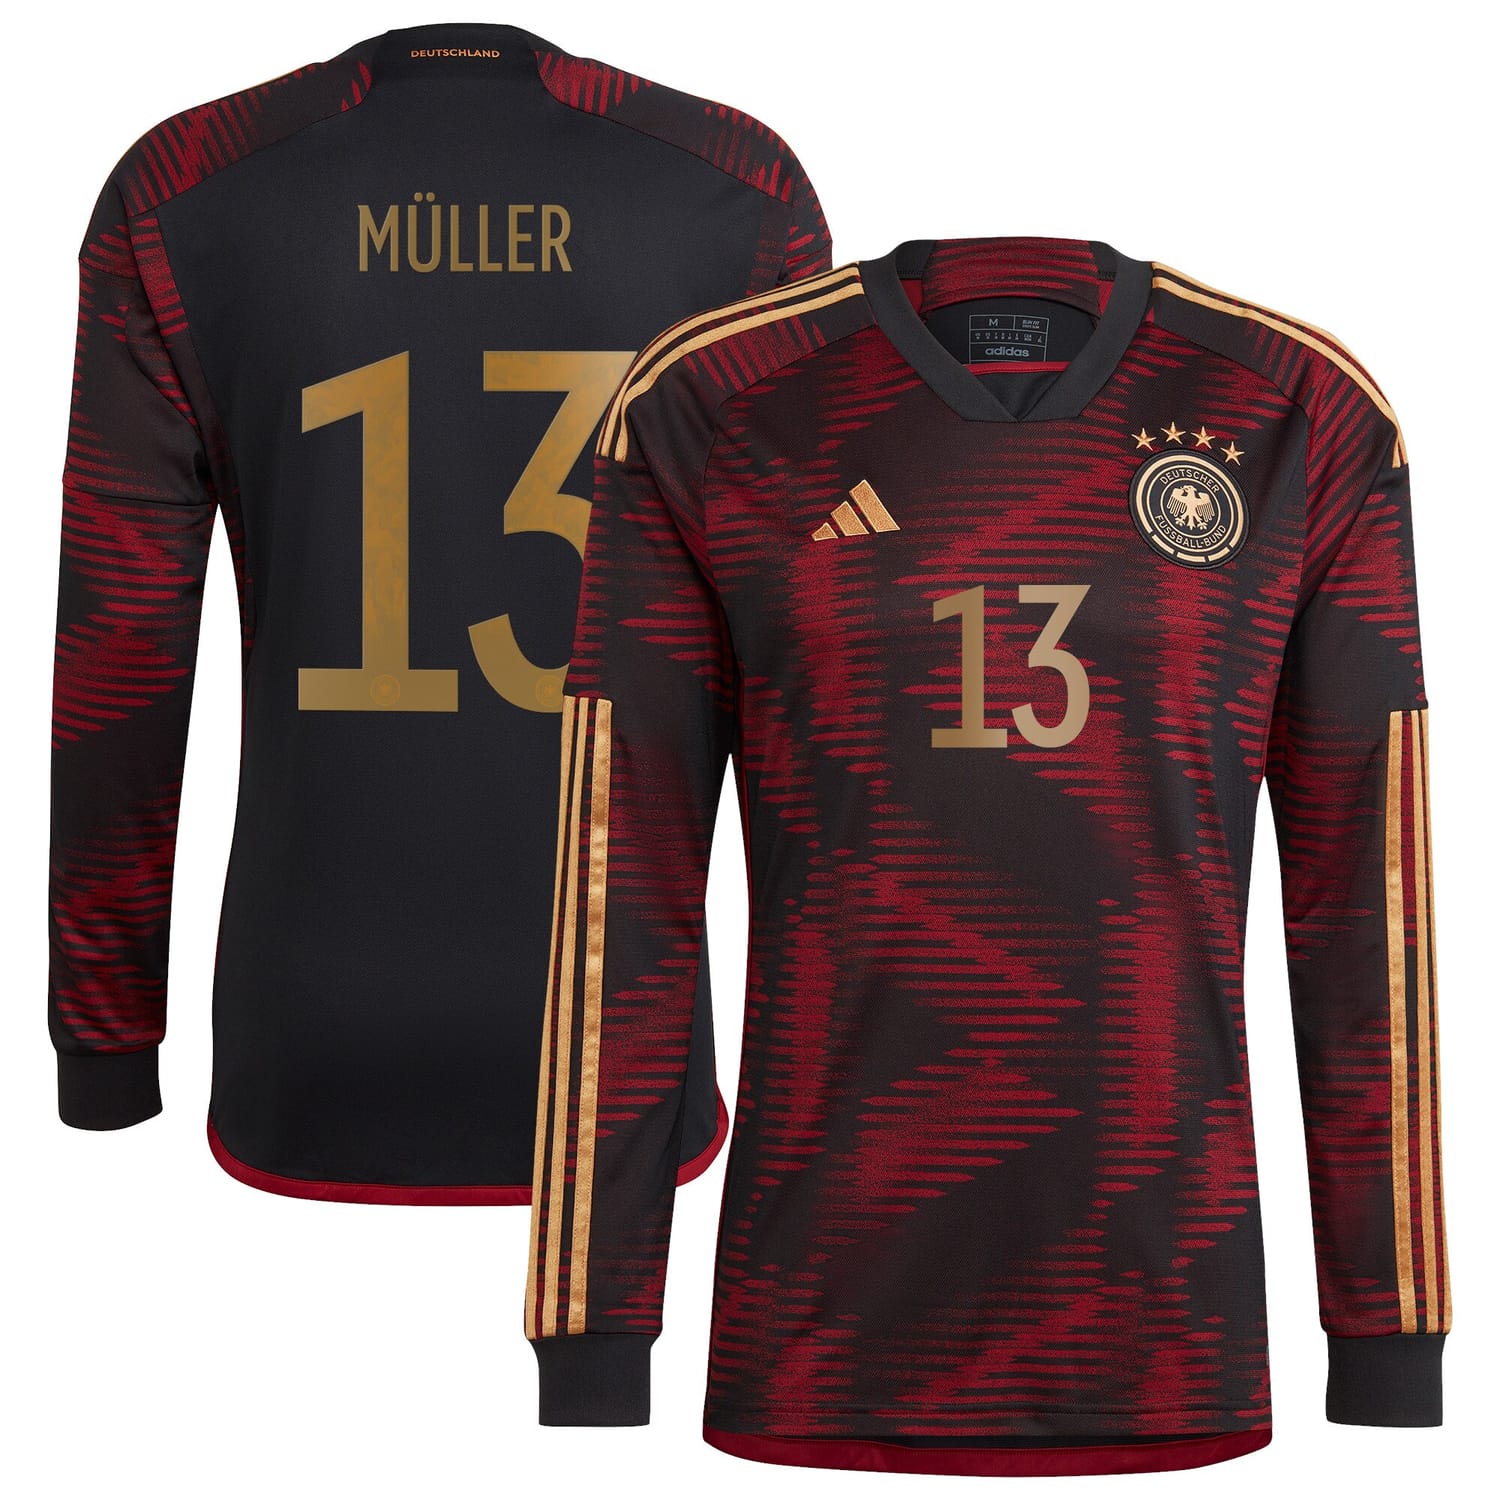 Germany National Team Away Jersey Shirt Long Sleeve player Thomas Müller 13 printing for Men